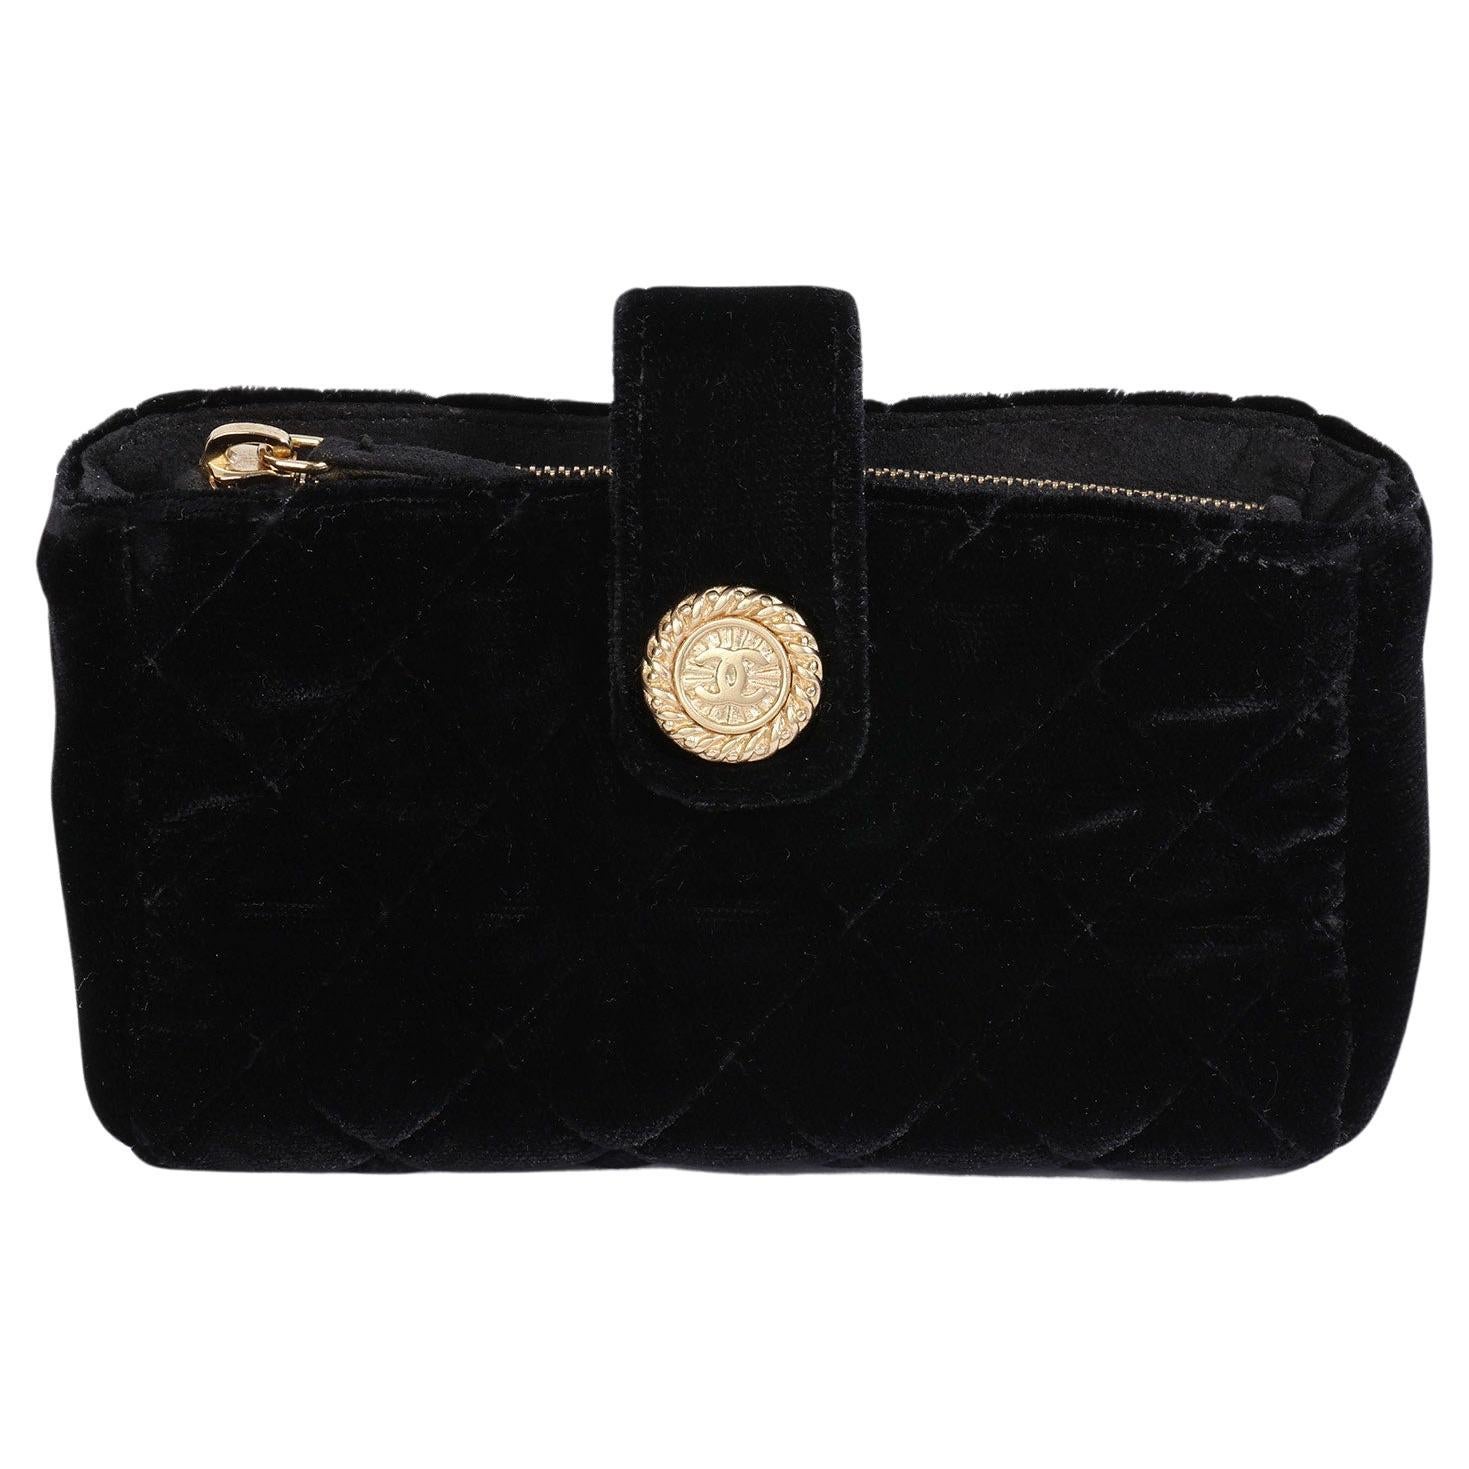 Chanel BLACK QUILTED VELVET LEATHER MINI POUCH